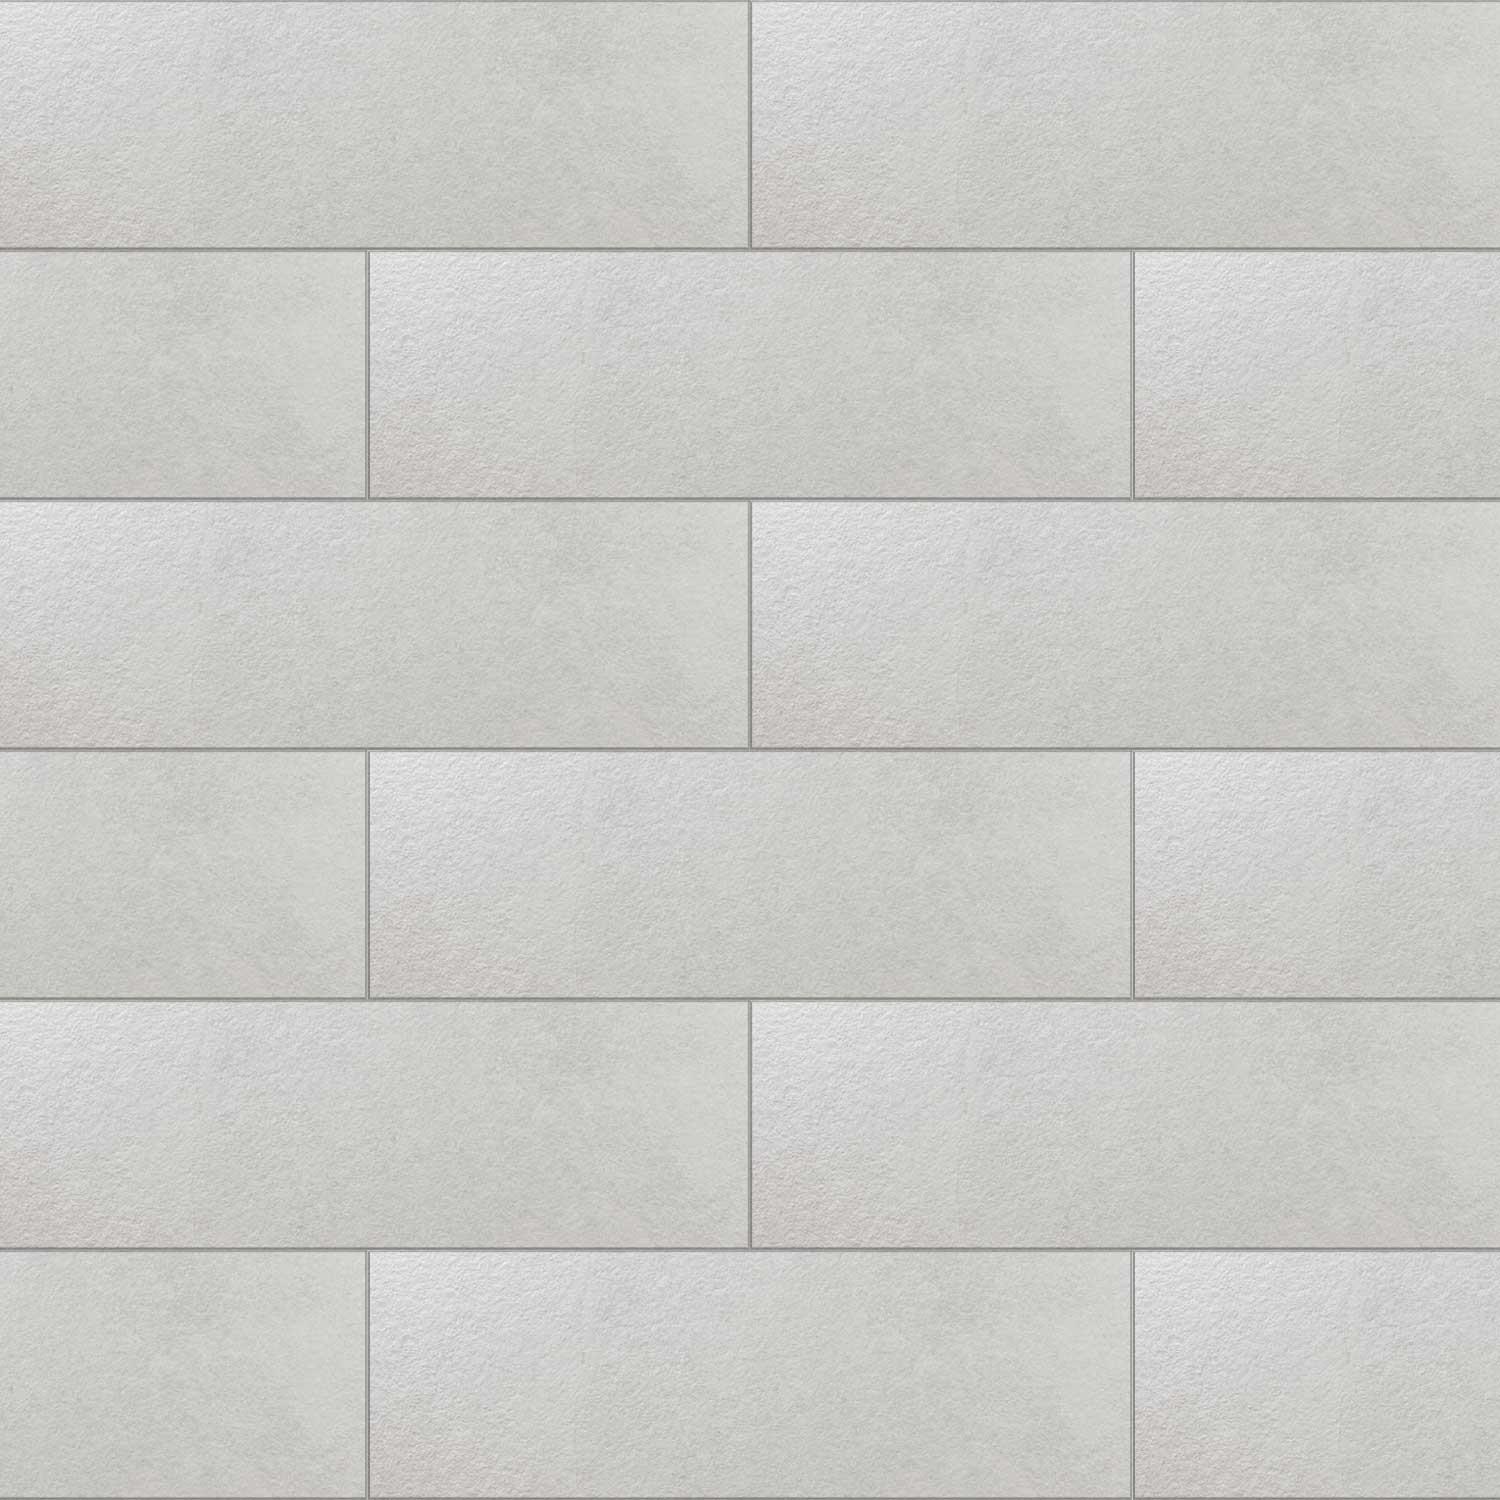 Touchstone White Ceramic Wall Tile Large Stone Effect 290 x 890mm